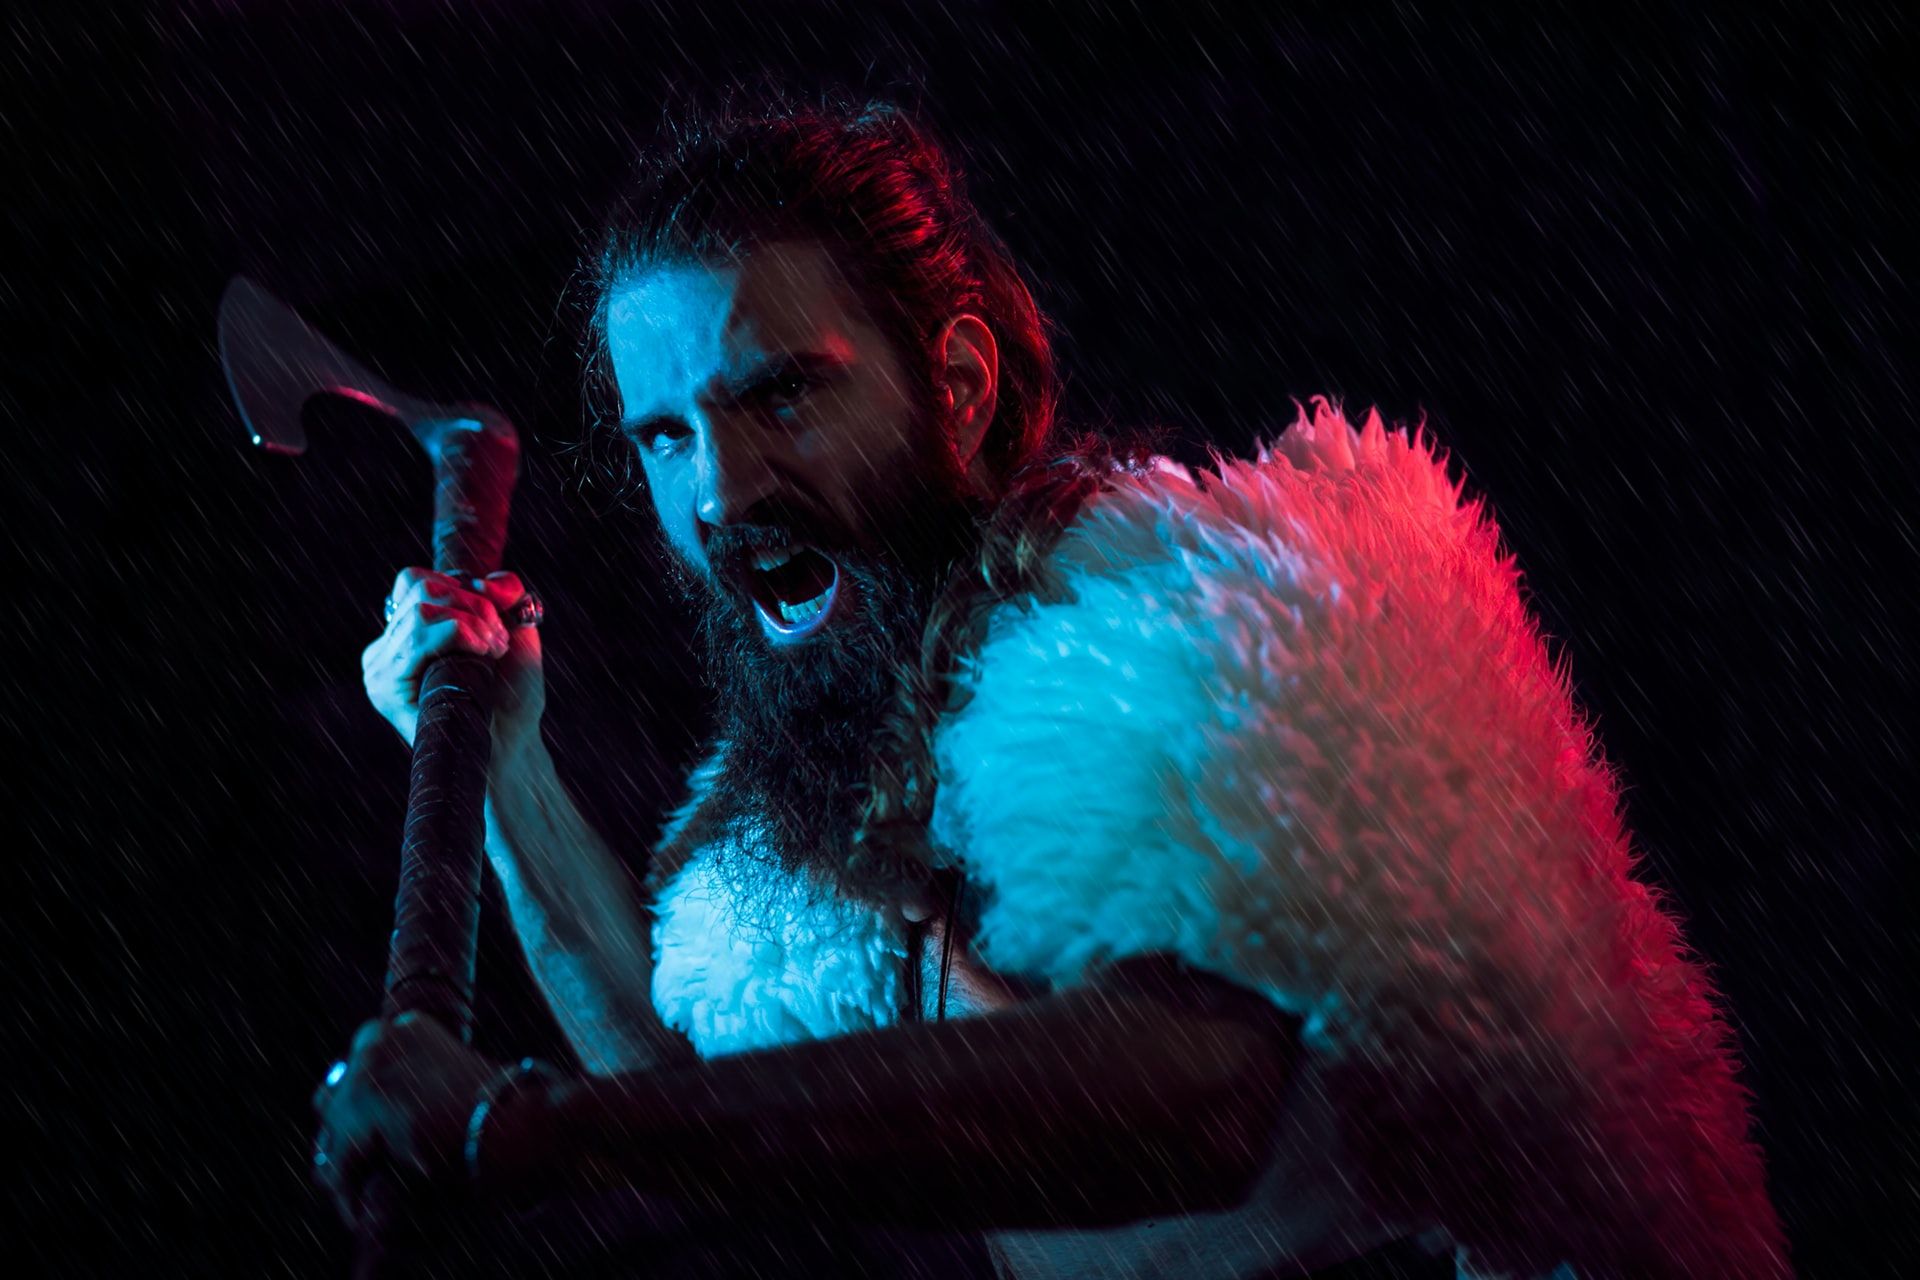 A man bearing an ax and opening his mouth in a yell. He has long hair and a beard, and wears a white fur cloak.